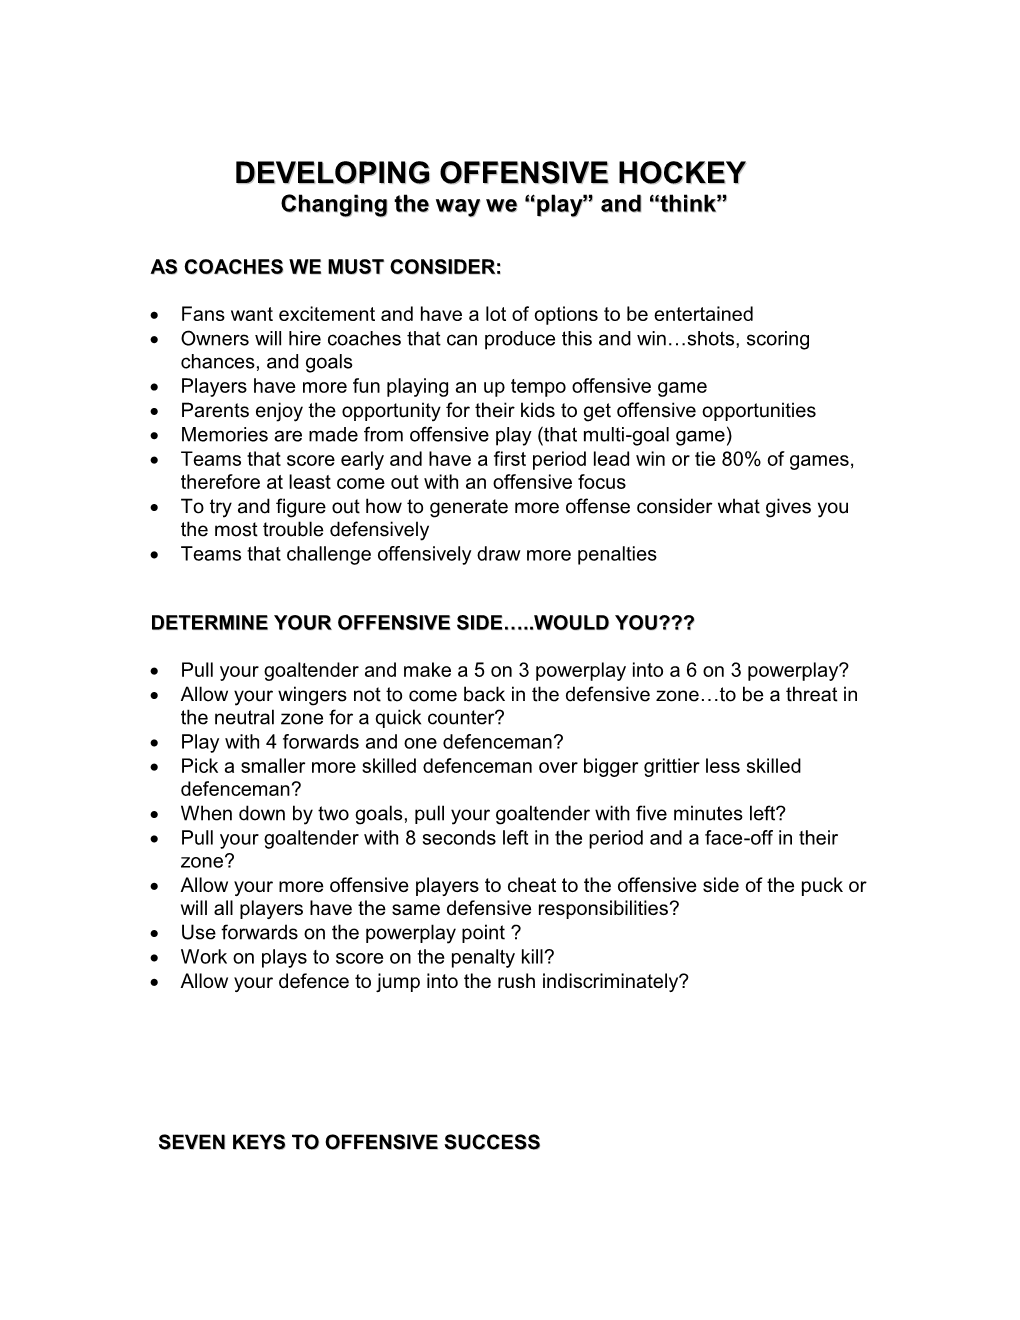 DEVELOPING OFFENSIVE HOCKEY Changing the Way We “Play” and “Think”